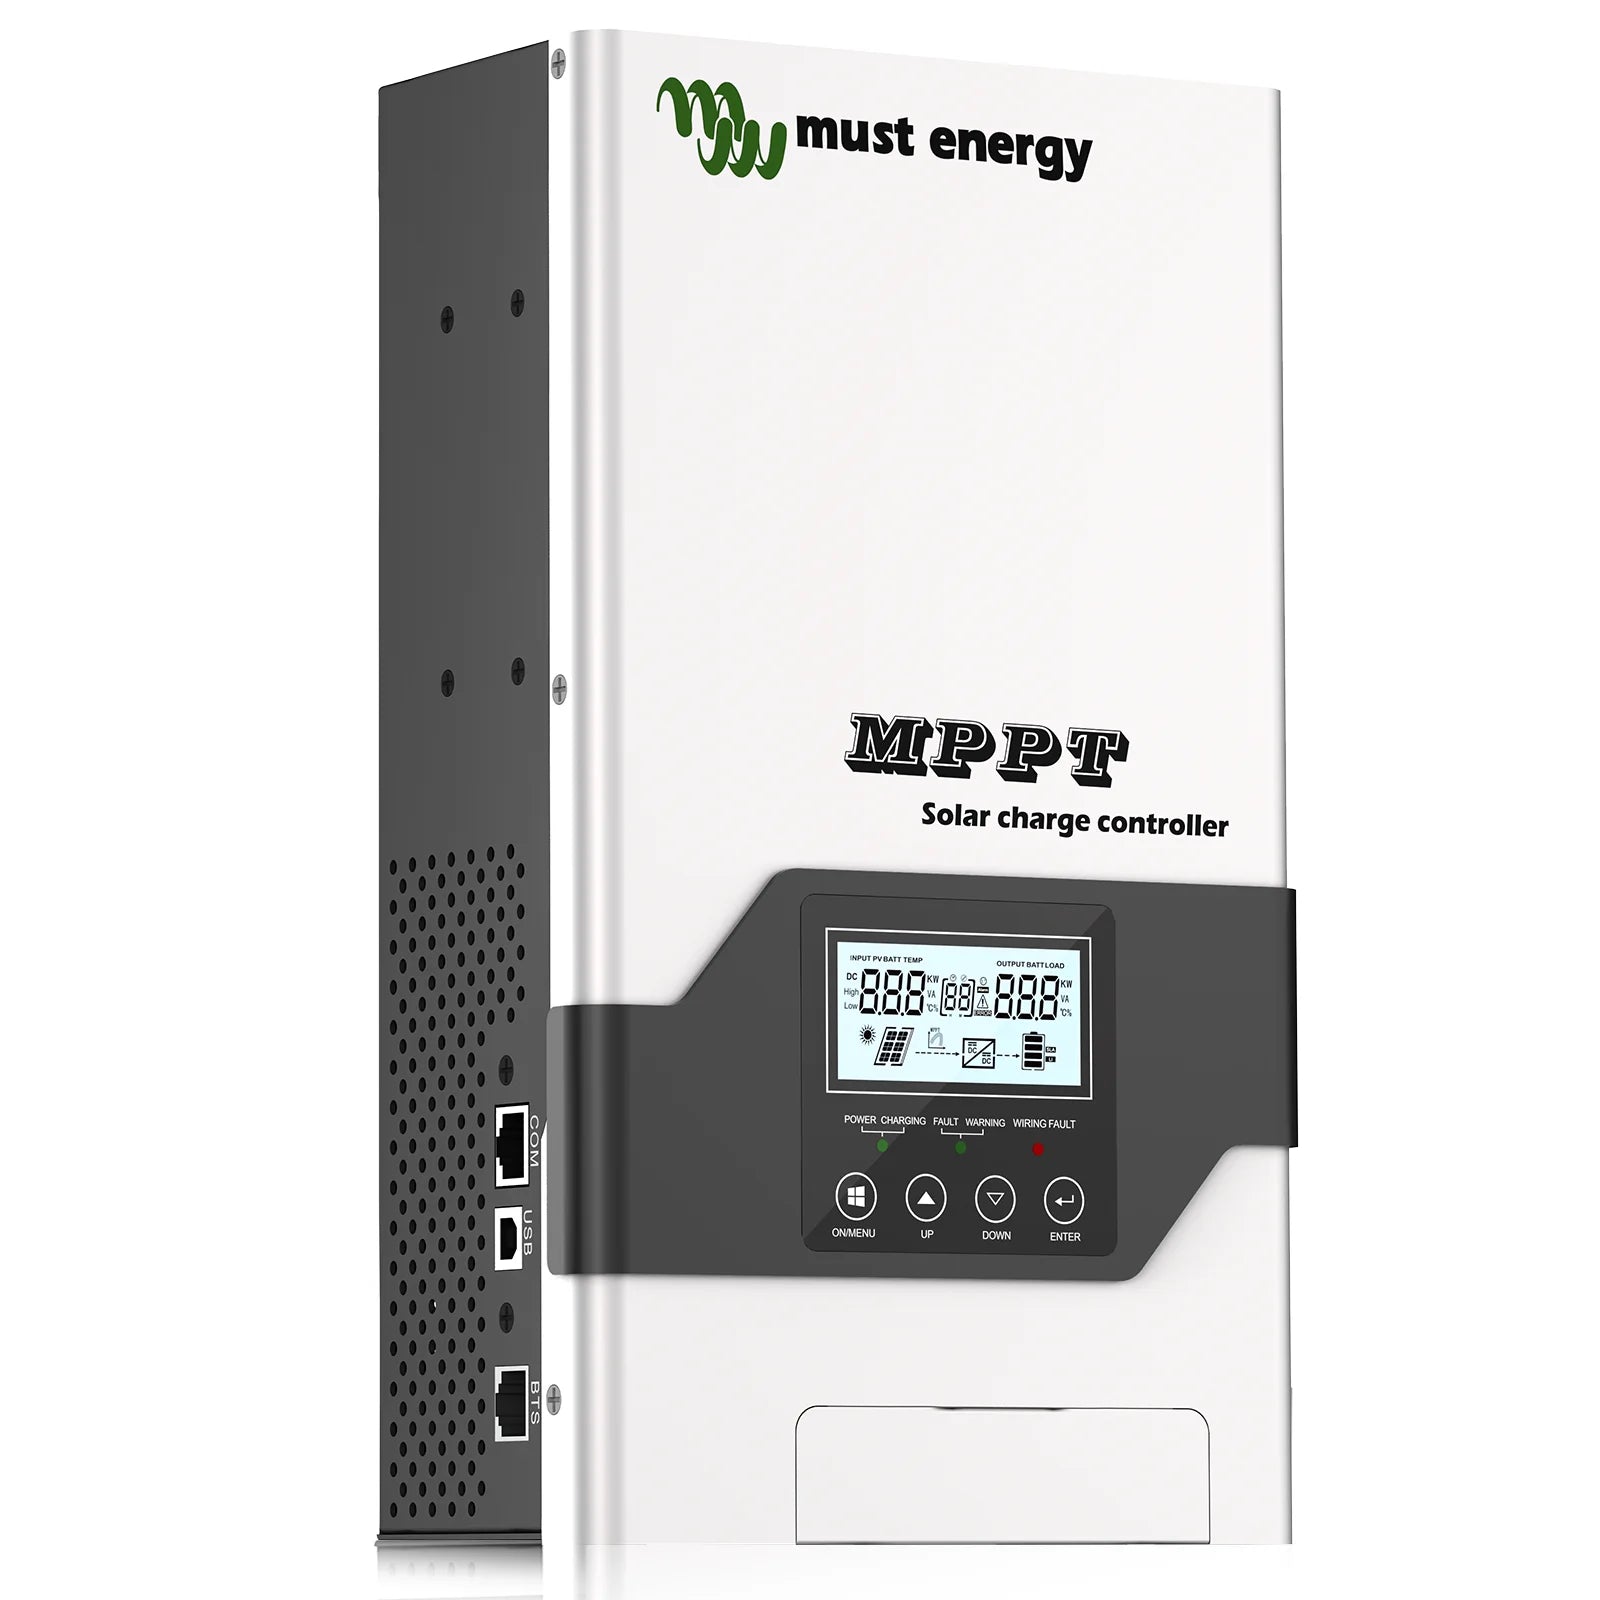 MUST ENERGY 80A 100A MPPT Solar Charge Controller, Solar charge controller with MPPT tech, suitable for 12V-48V systems, featuring fault warnings and protections.